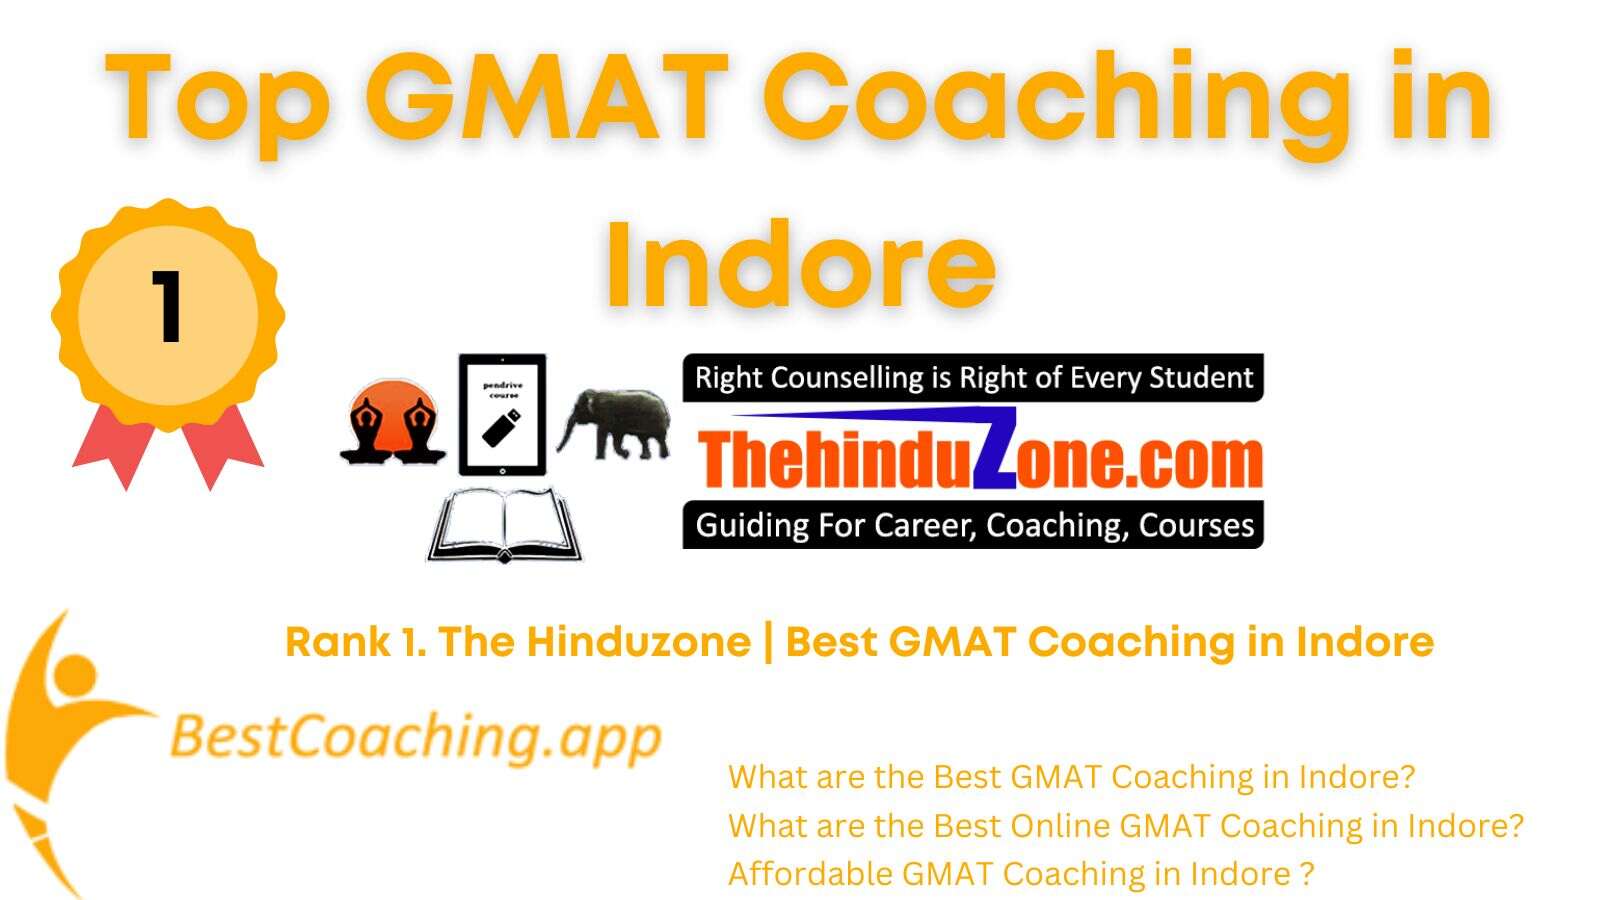 Rank 1. The Hinduzone | Best GMAT Coaching in Indore